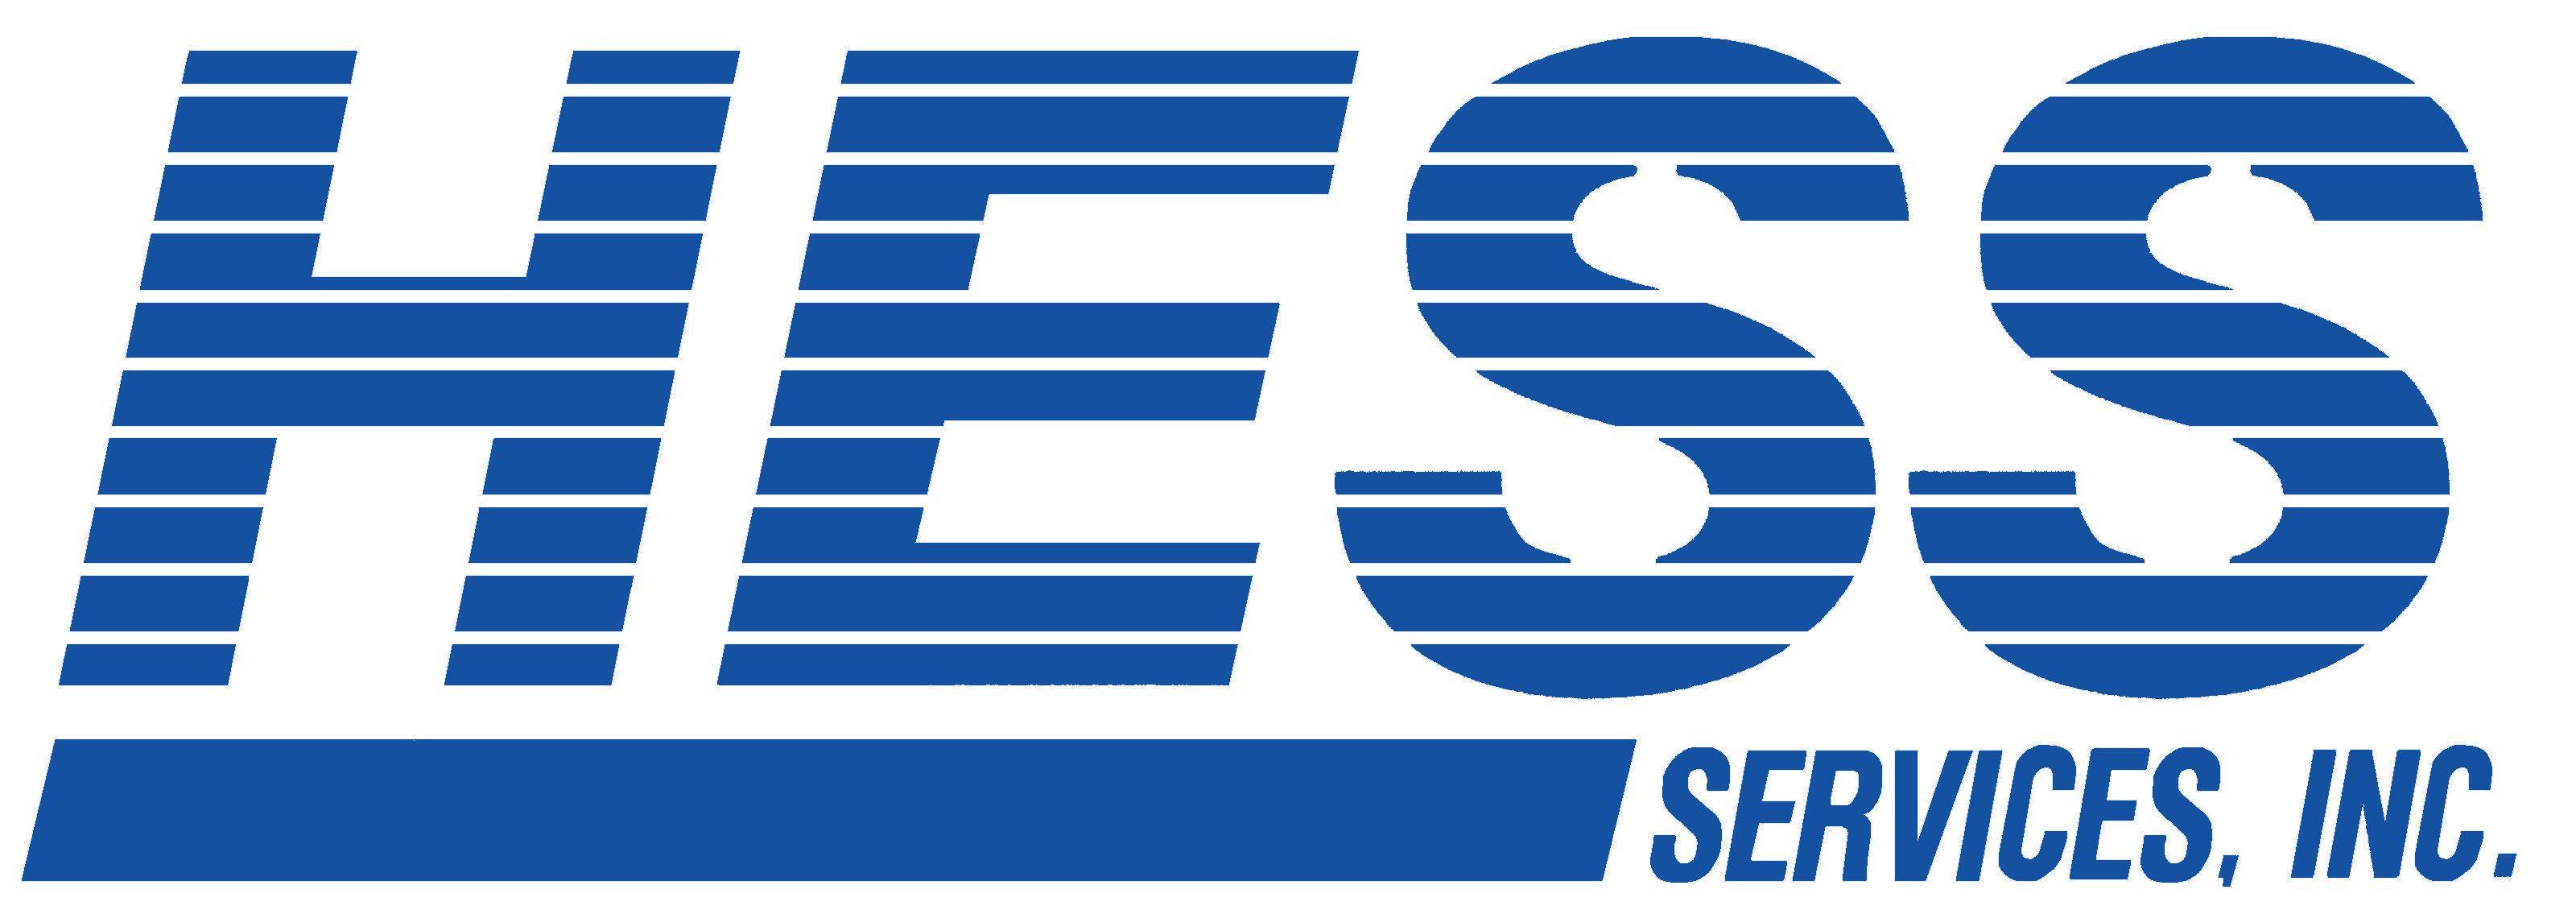 British American Transport Company Logo - Hess Services adding new shift, hiring 50 additional workers